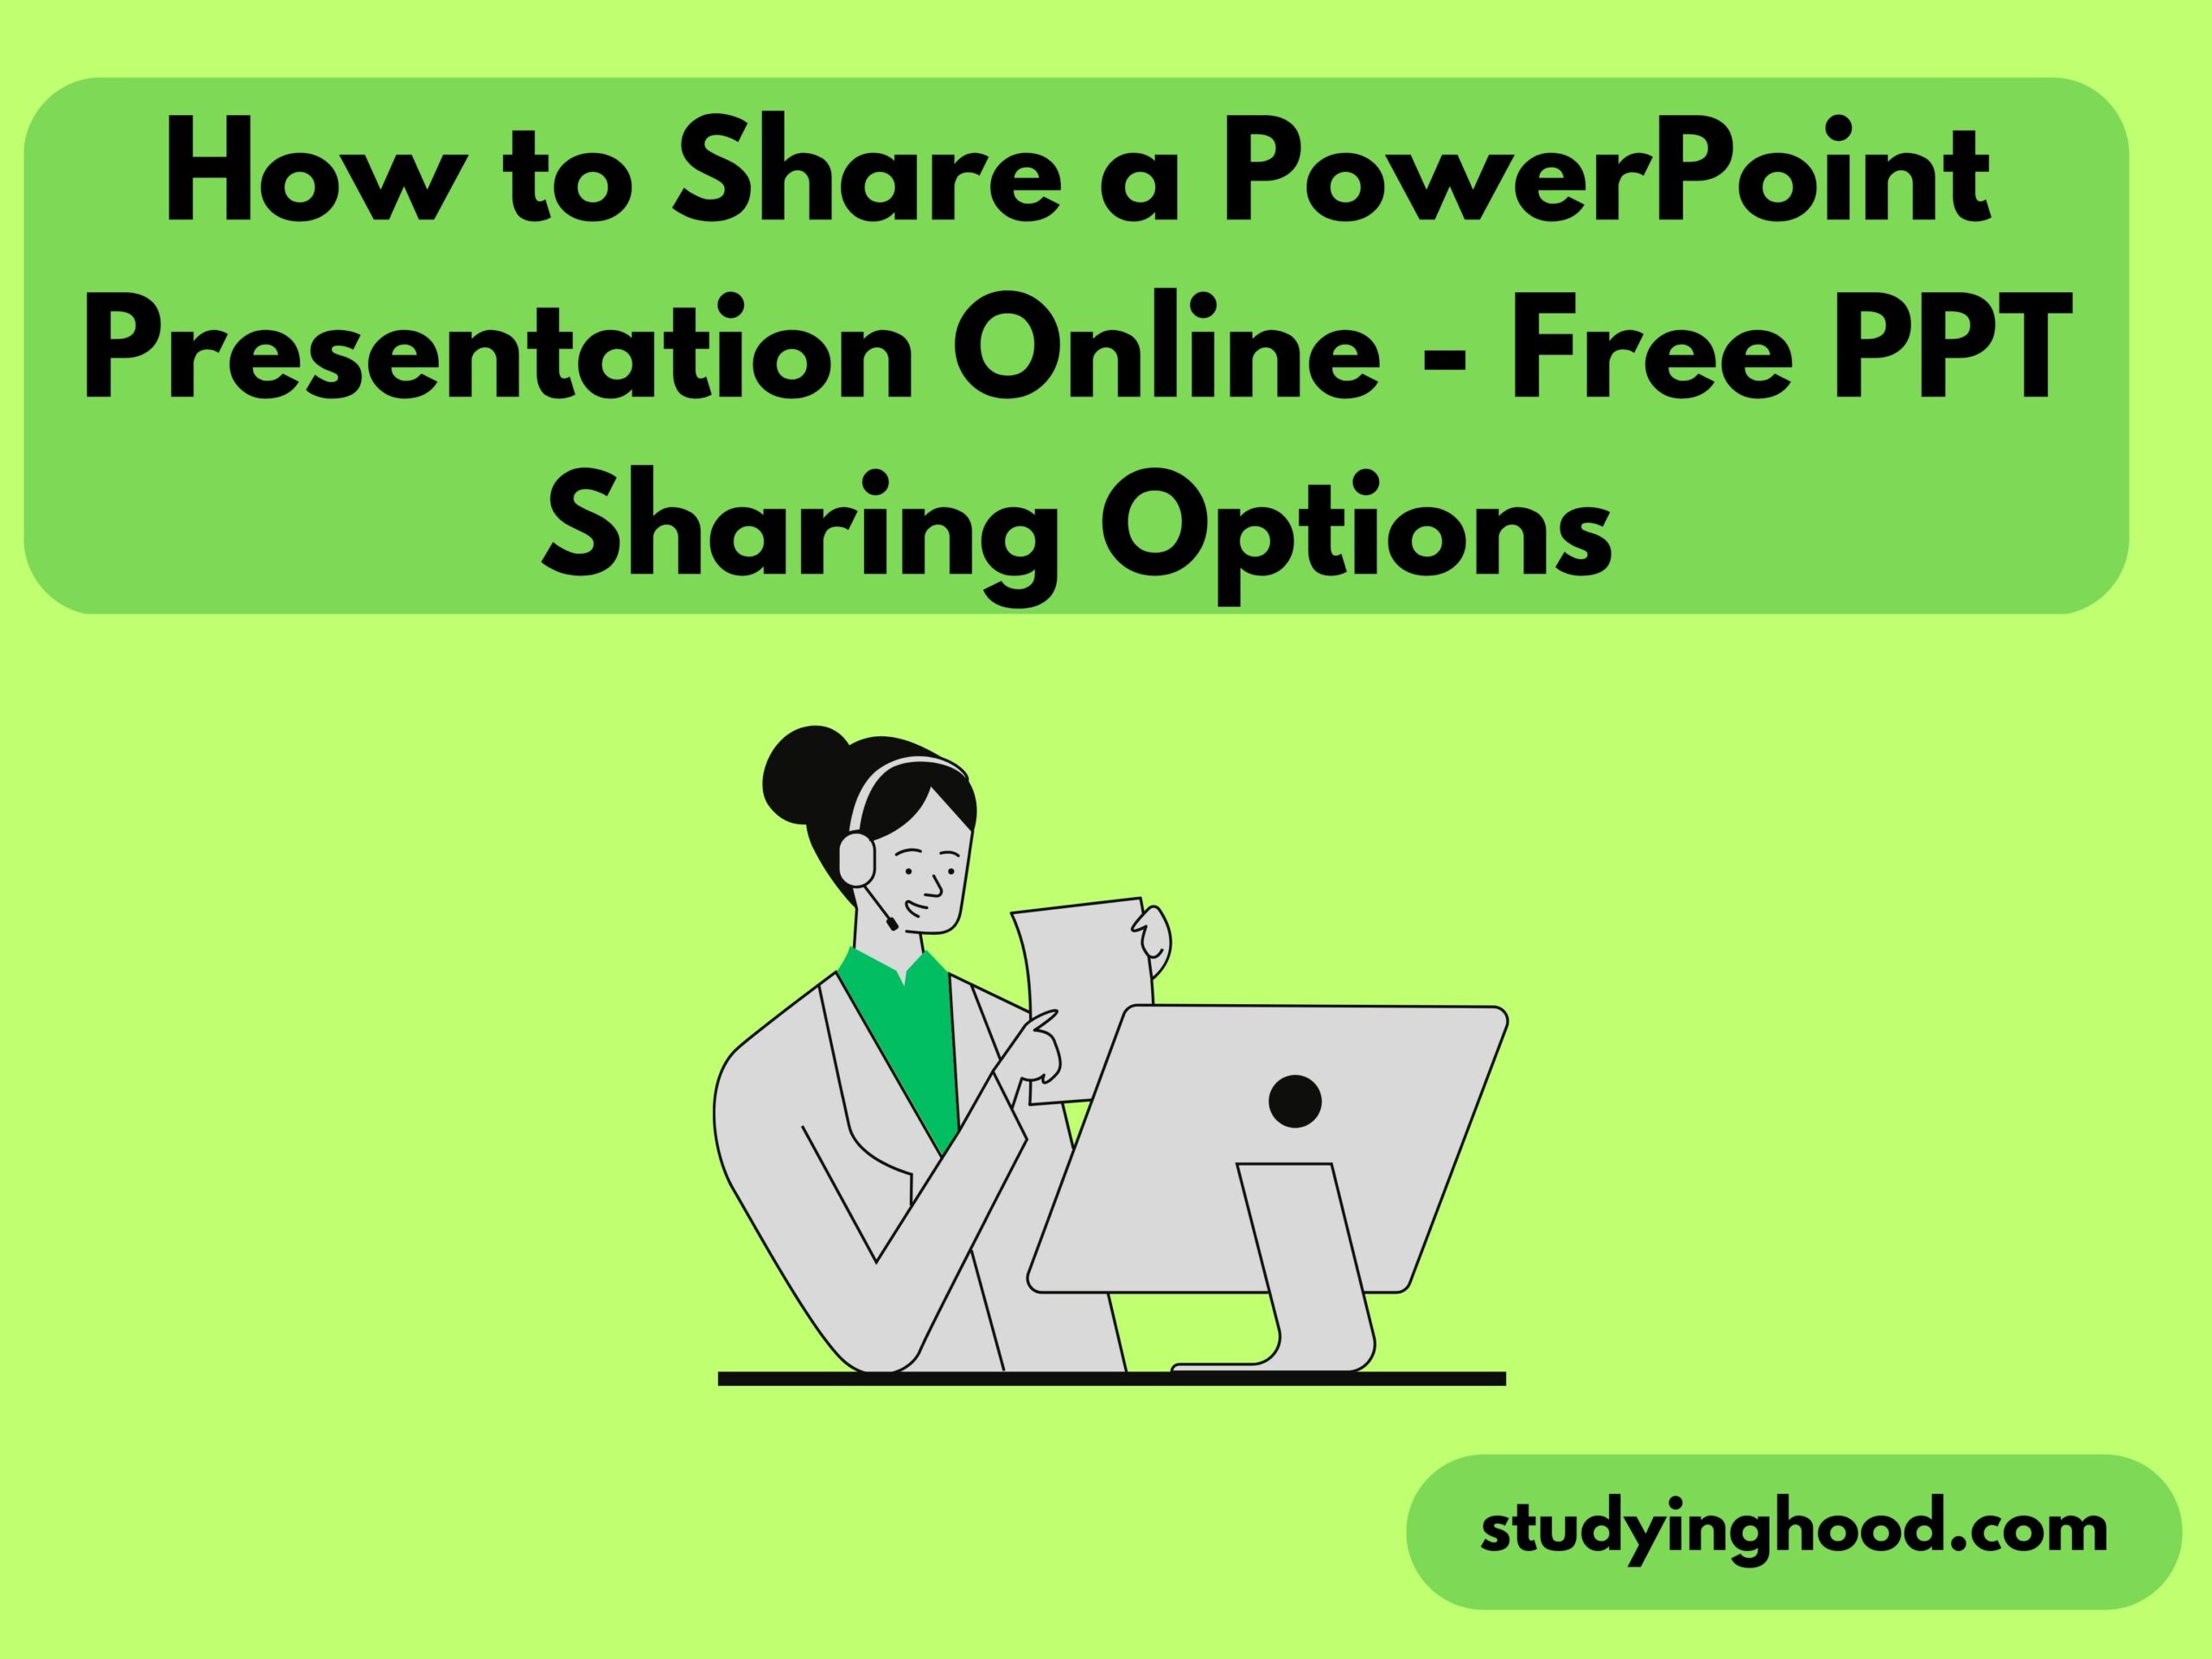 How to Share a PowerPoint Presentation Online - Free PPT Sharing Options